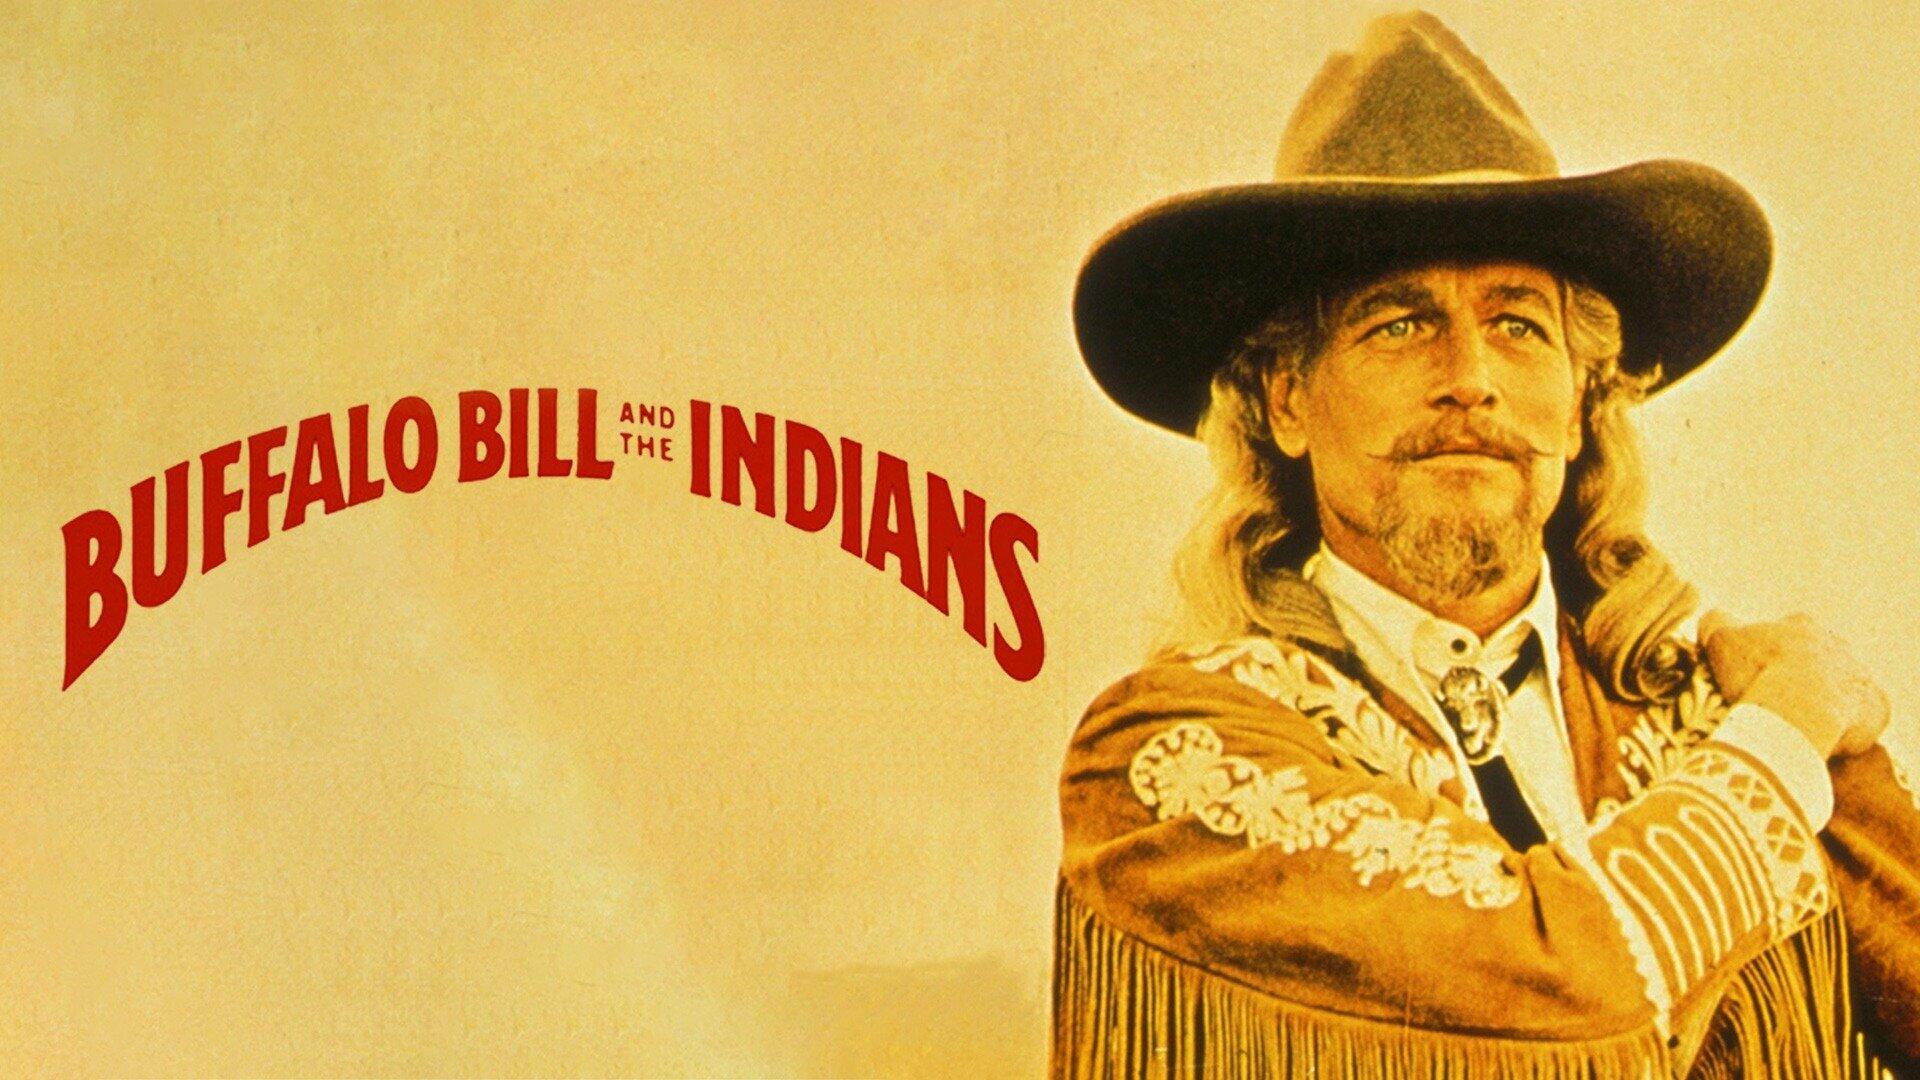 47-facts-about-the-movie-buffalo-bill-and-the-indians